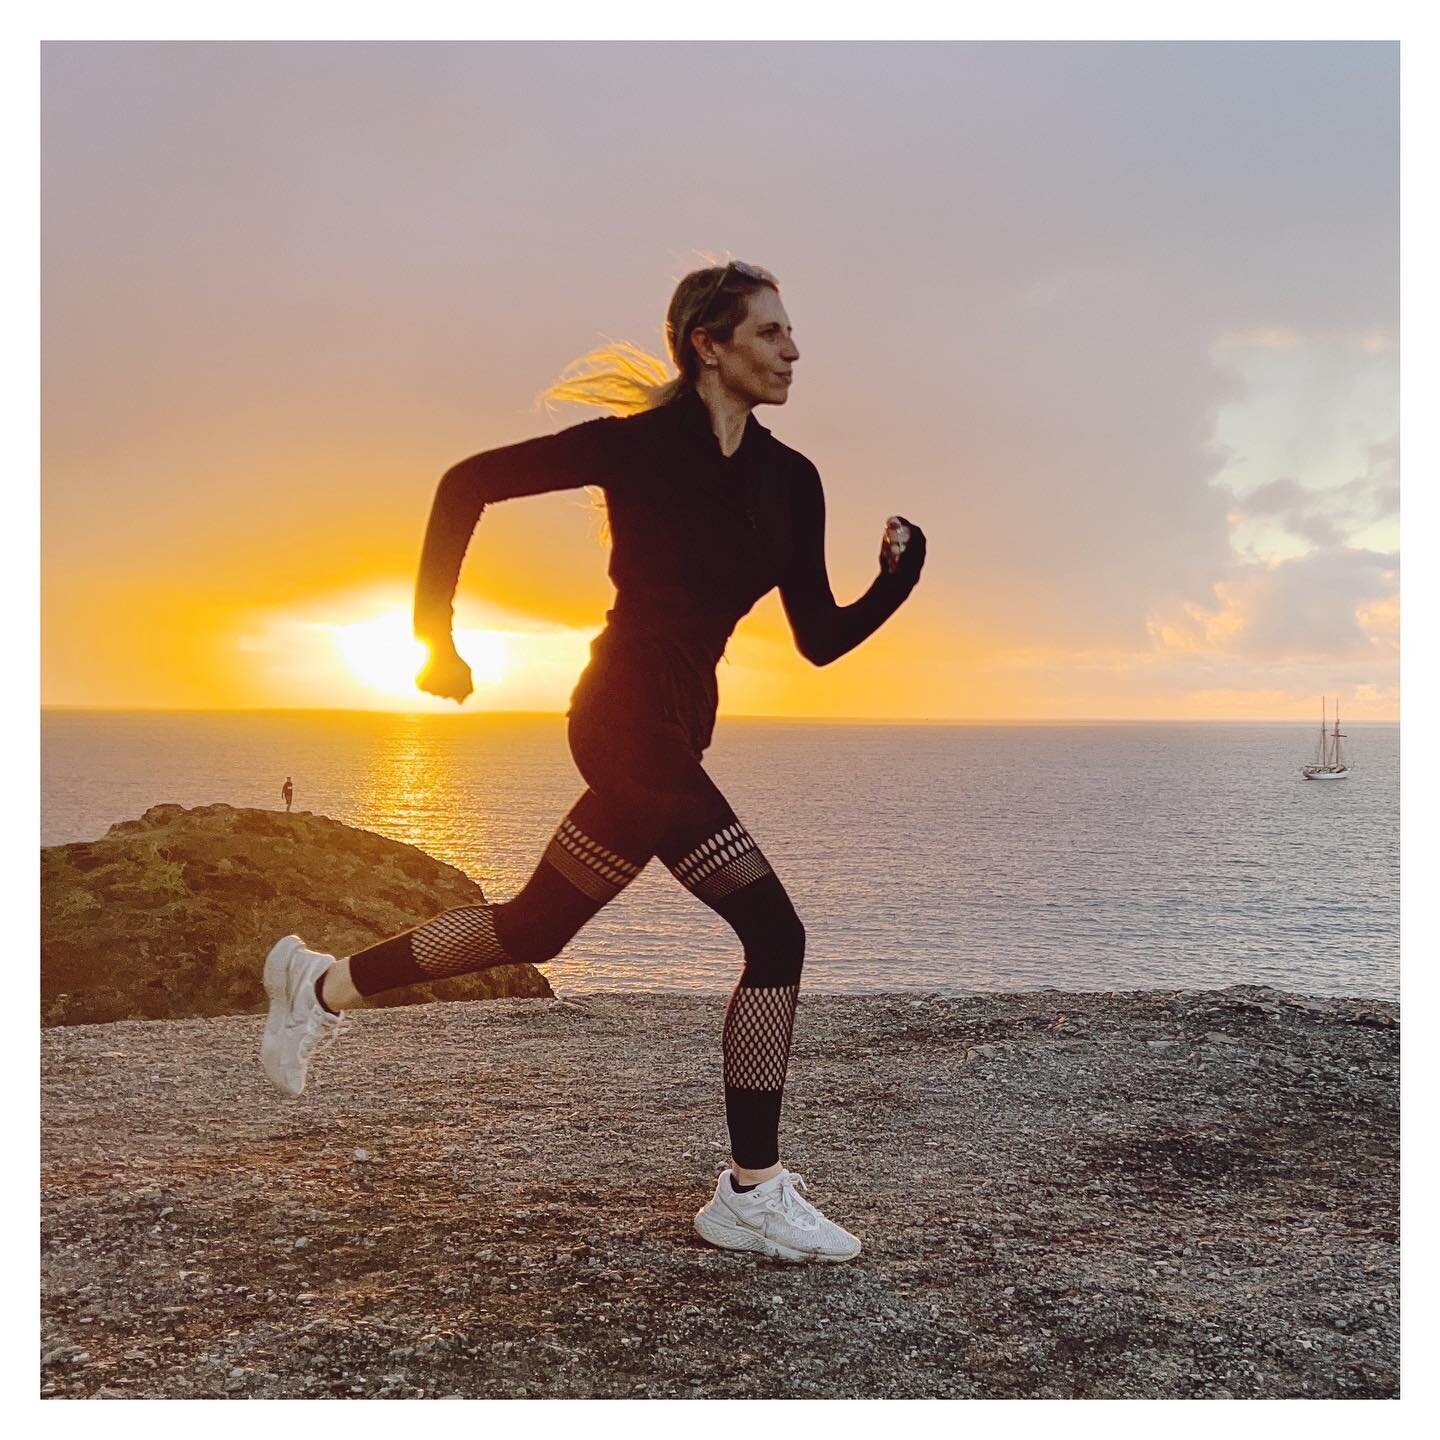 RUNNING BACK TO ME, MYSELF&hellip; I. 

Deciding to give up running completely (per my doctor&rsquo;s orders), only 3 days after completing a 90km mountain ultra, and 1 day after finding out that I was pregnant&hellip; felt like one pretty disorienti